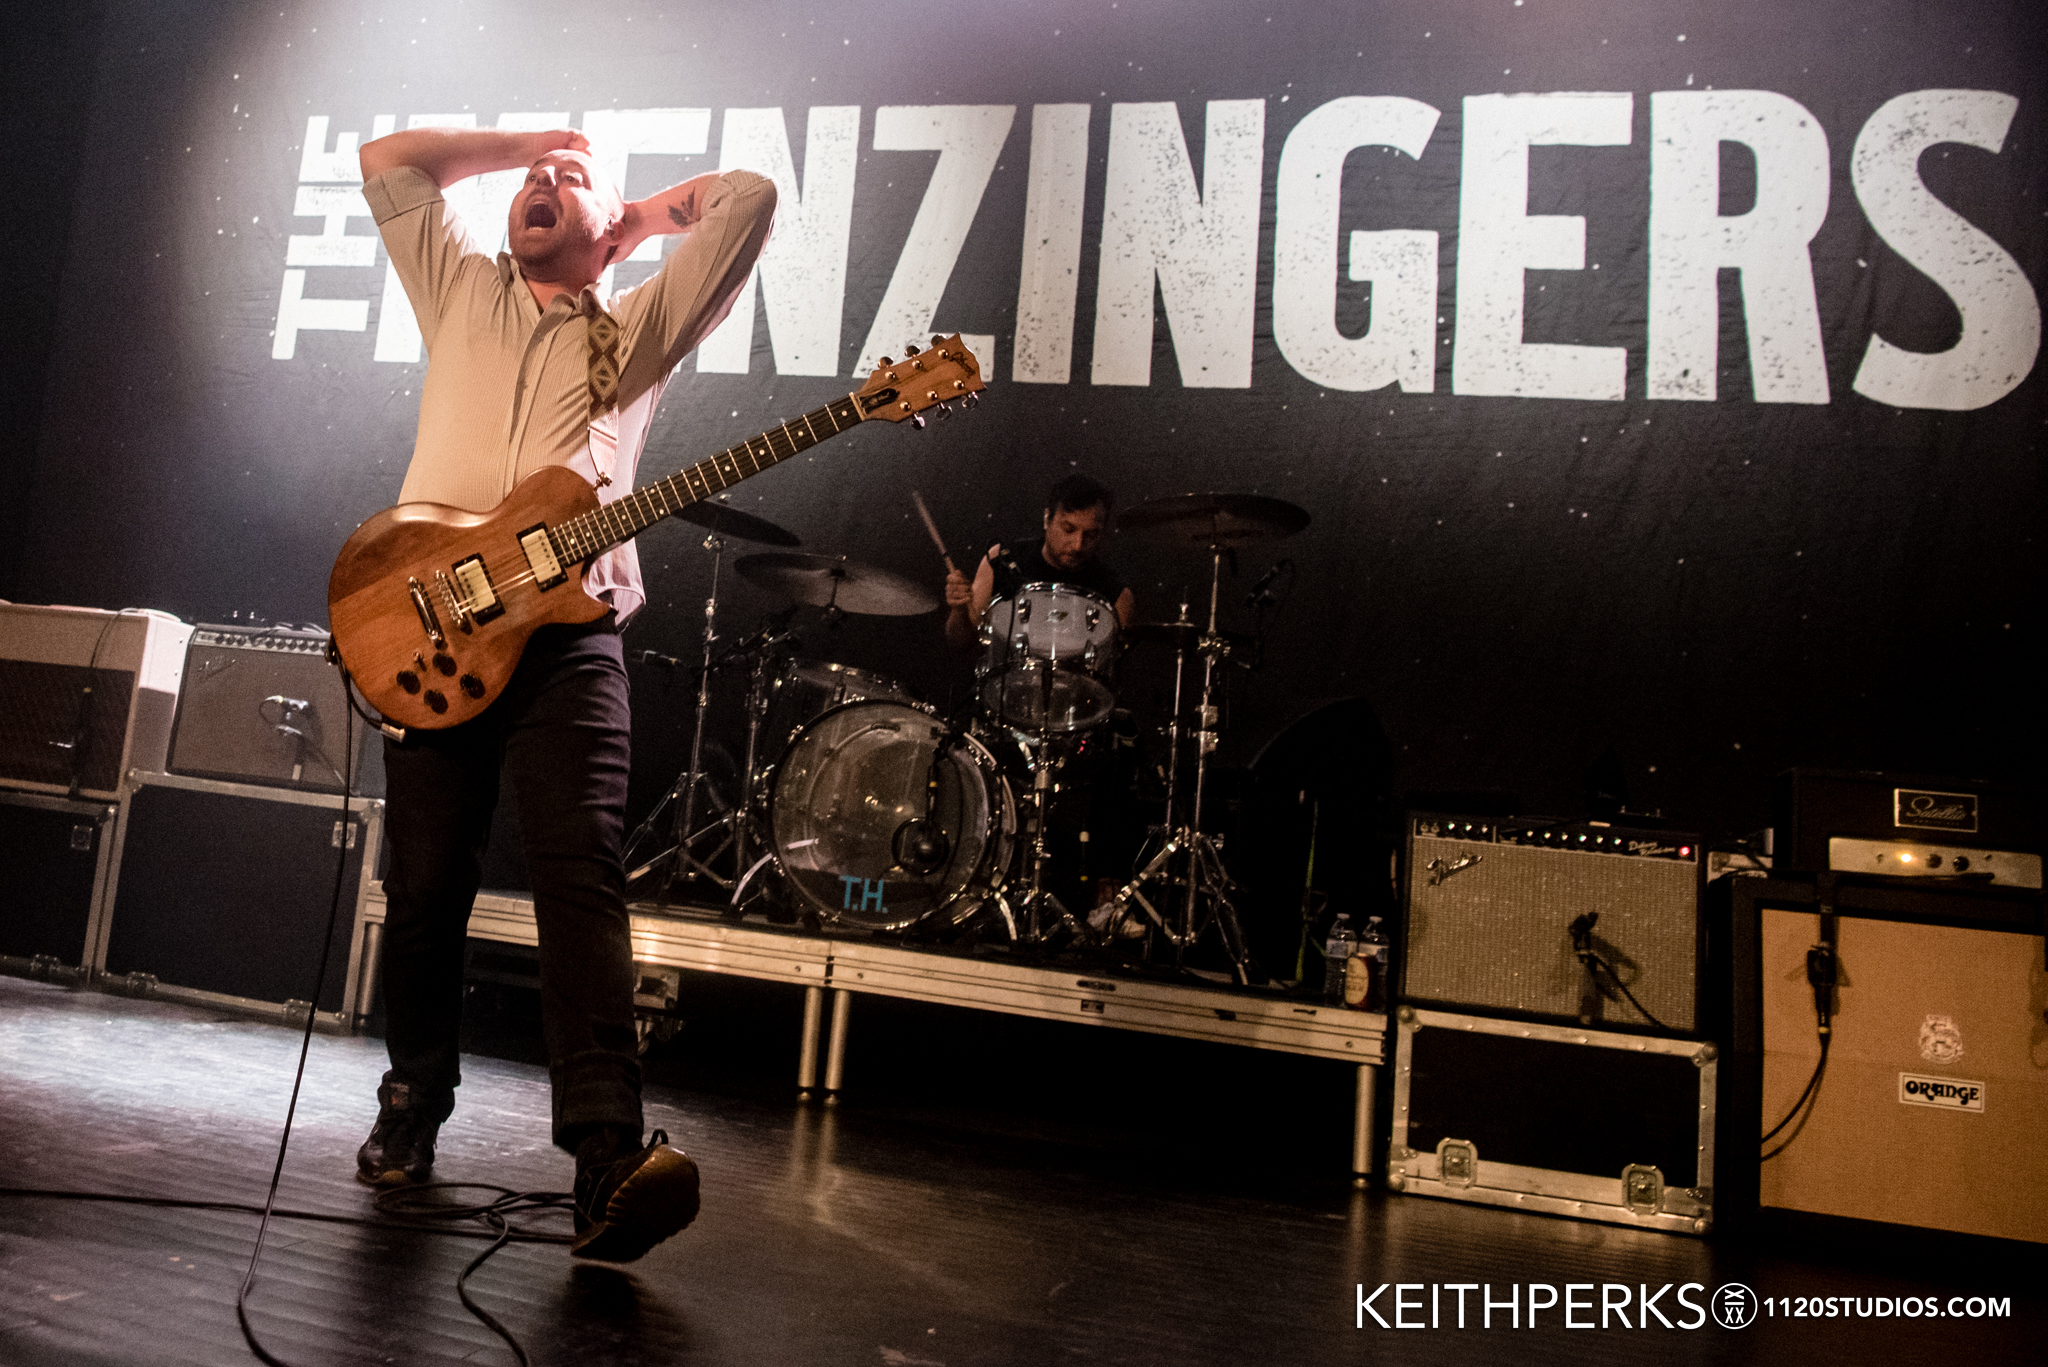 THE MENZINGERS WITH AARON WEST AT THE SHERMAN THEATER